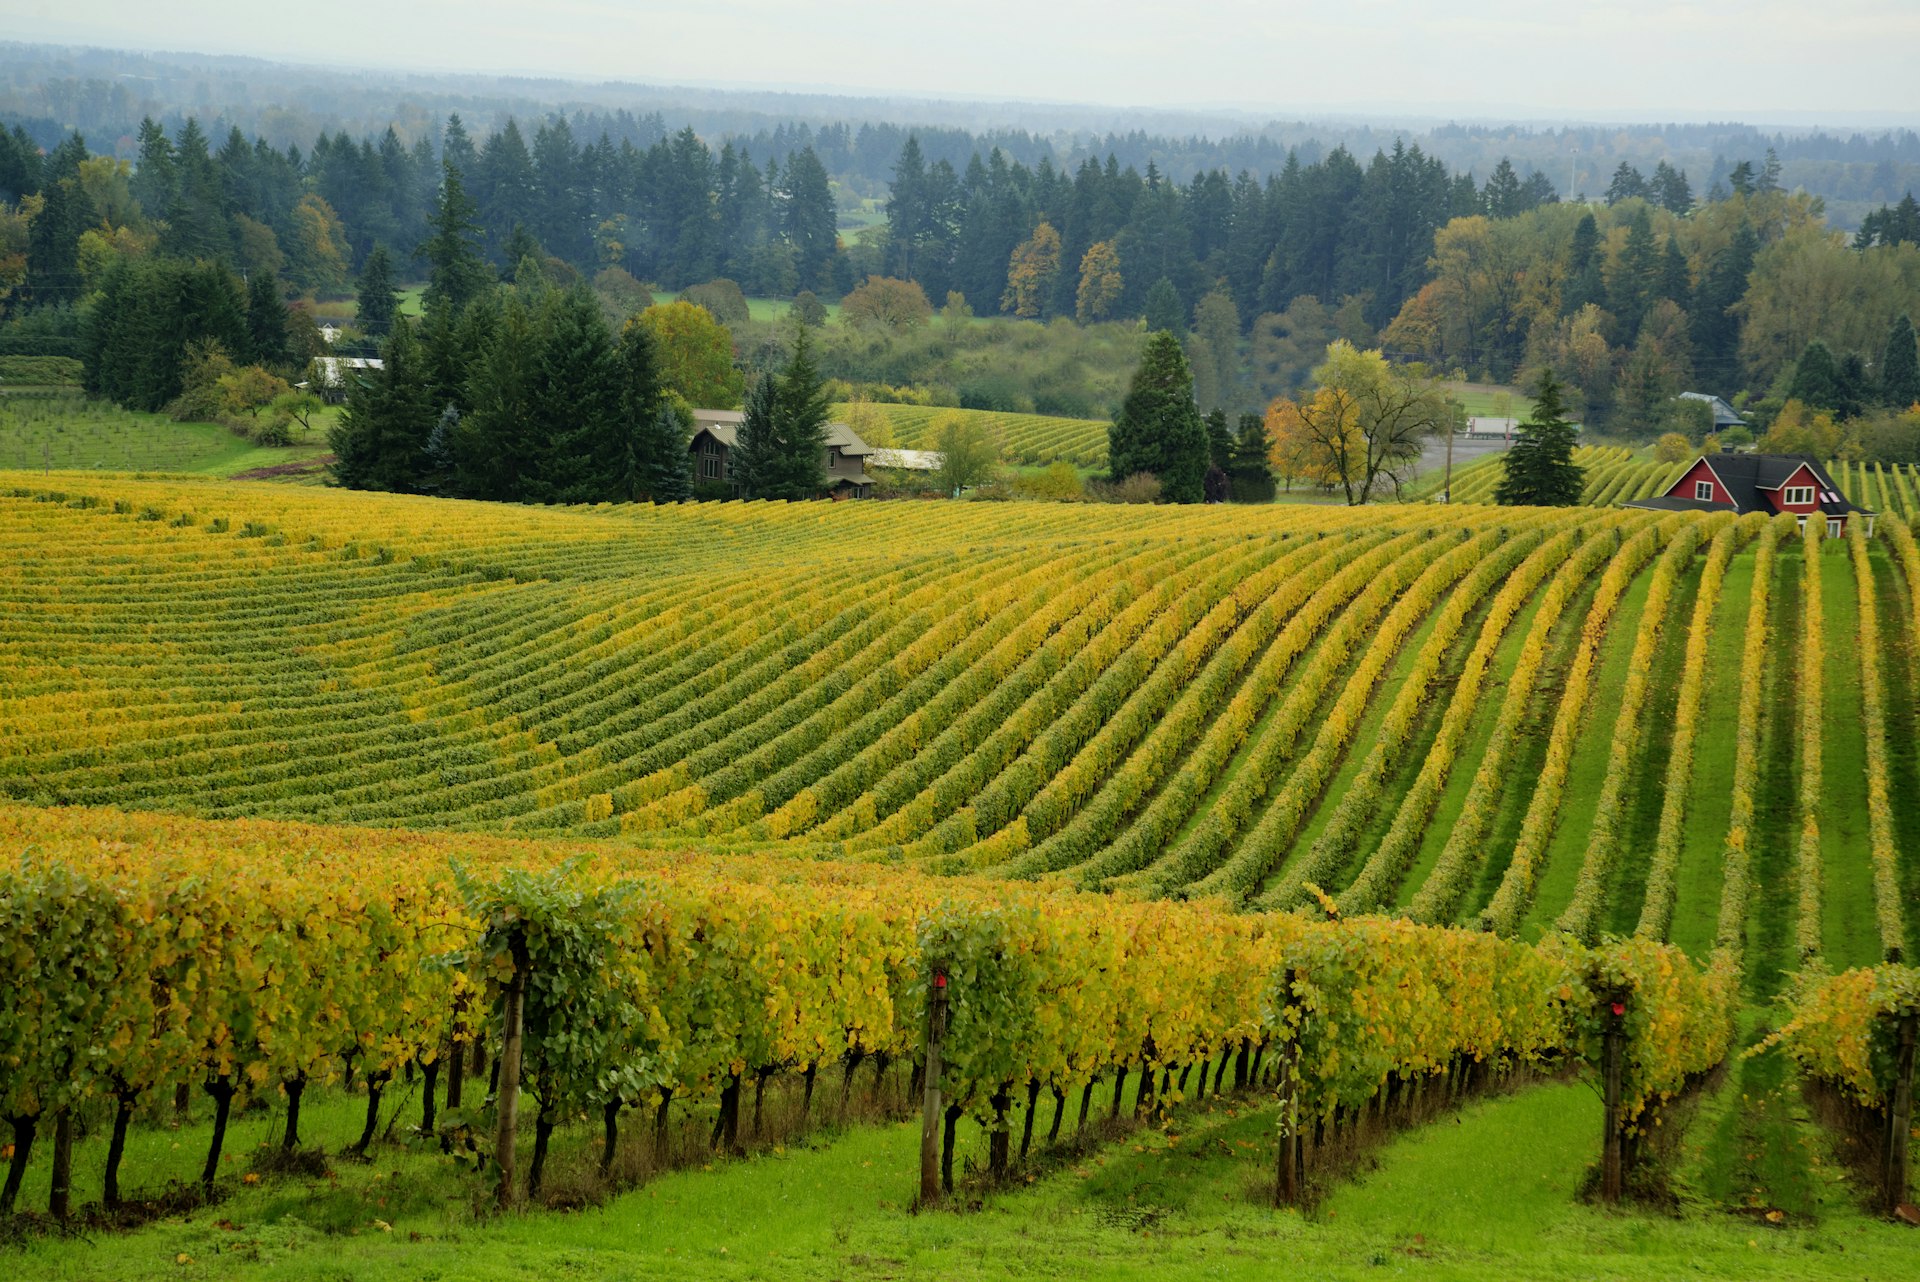 Rows of vines with leaves turning from green to yellow cover a hillside